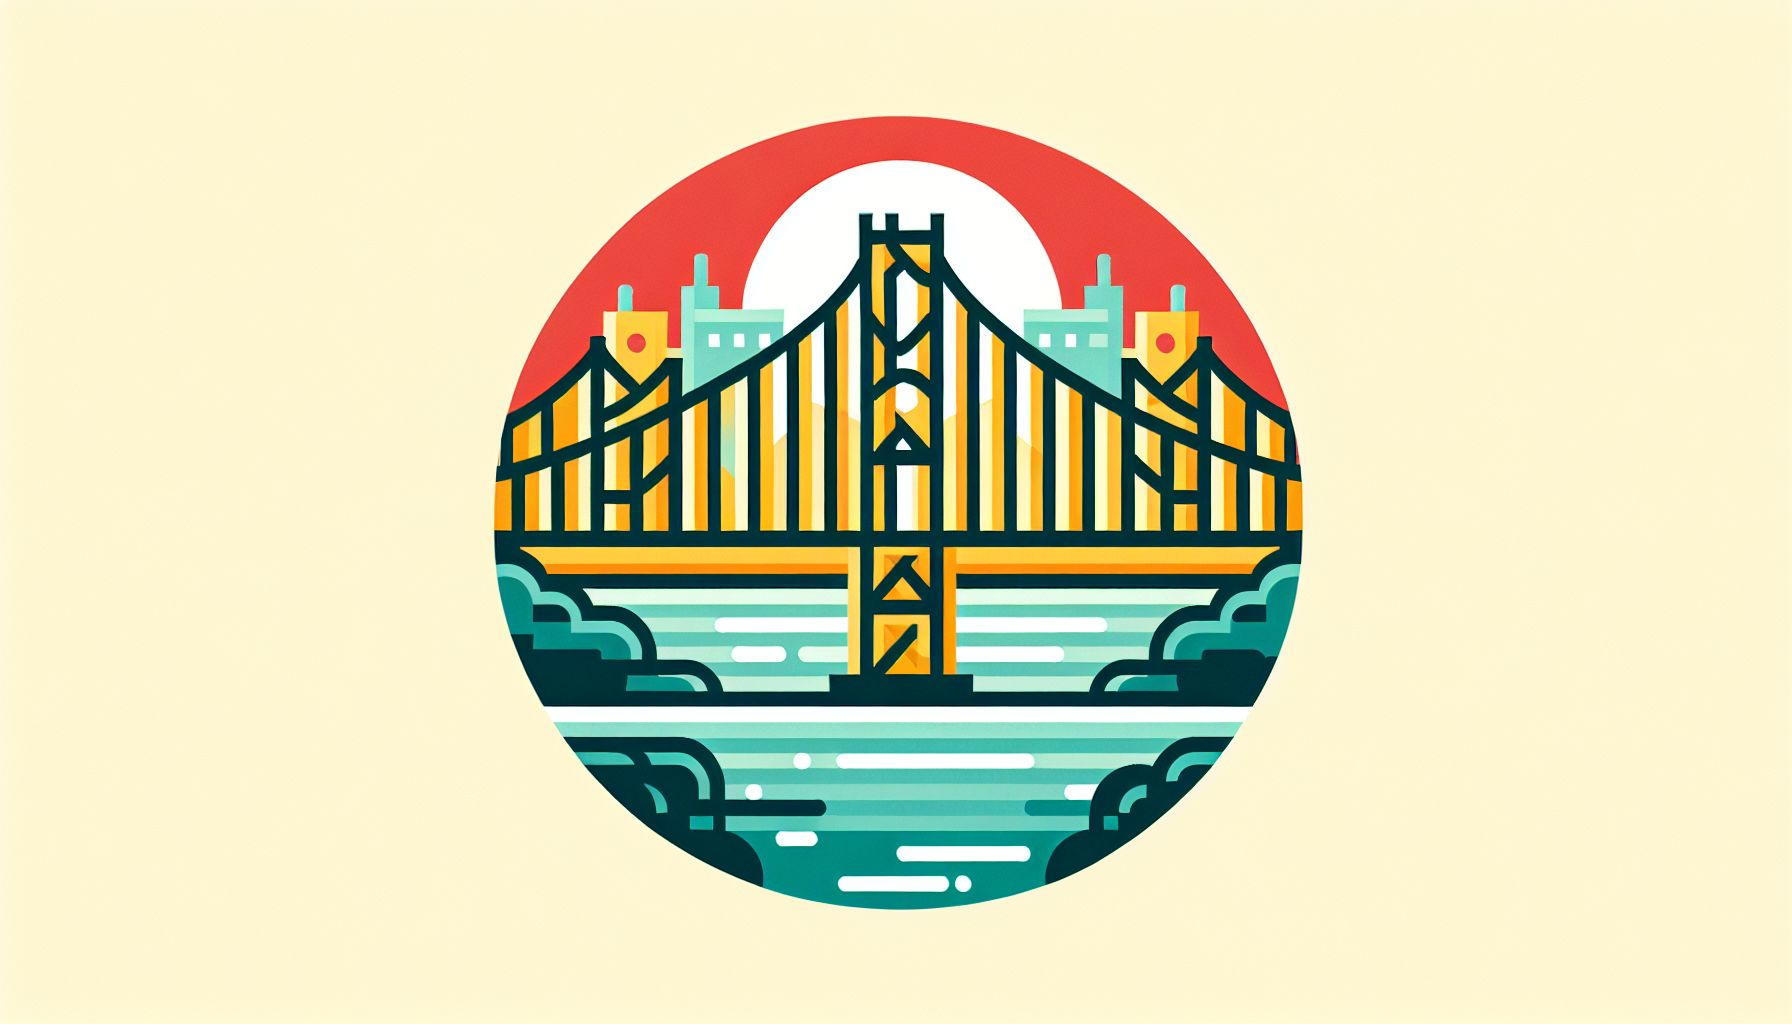 Bridge in flat illustration style and white background, red #f47574, green #88c7a8, yellow #fcc44b, and blue #645bc8 colors.